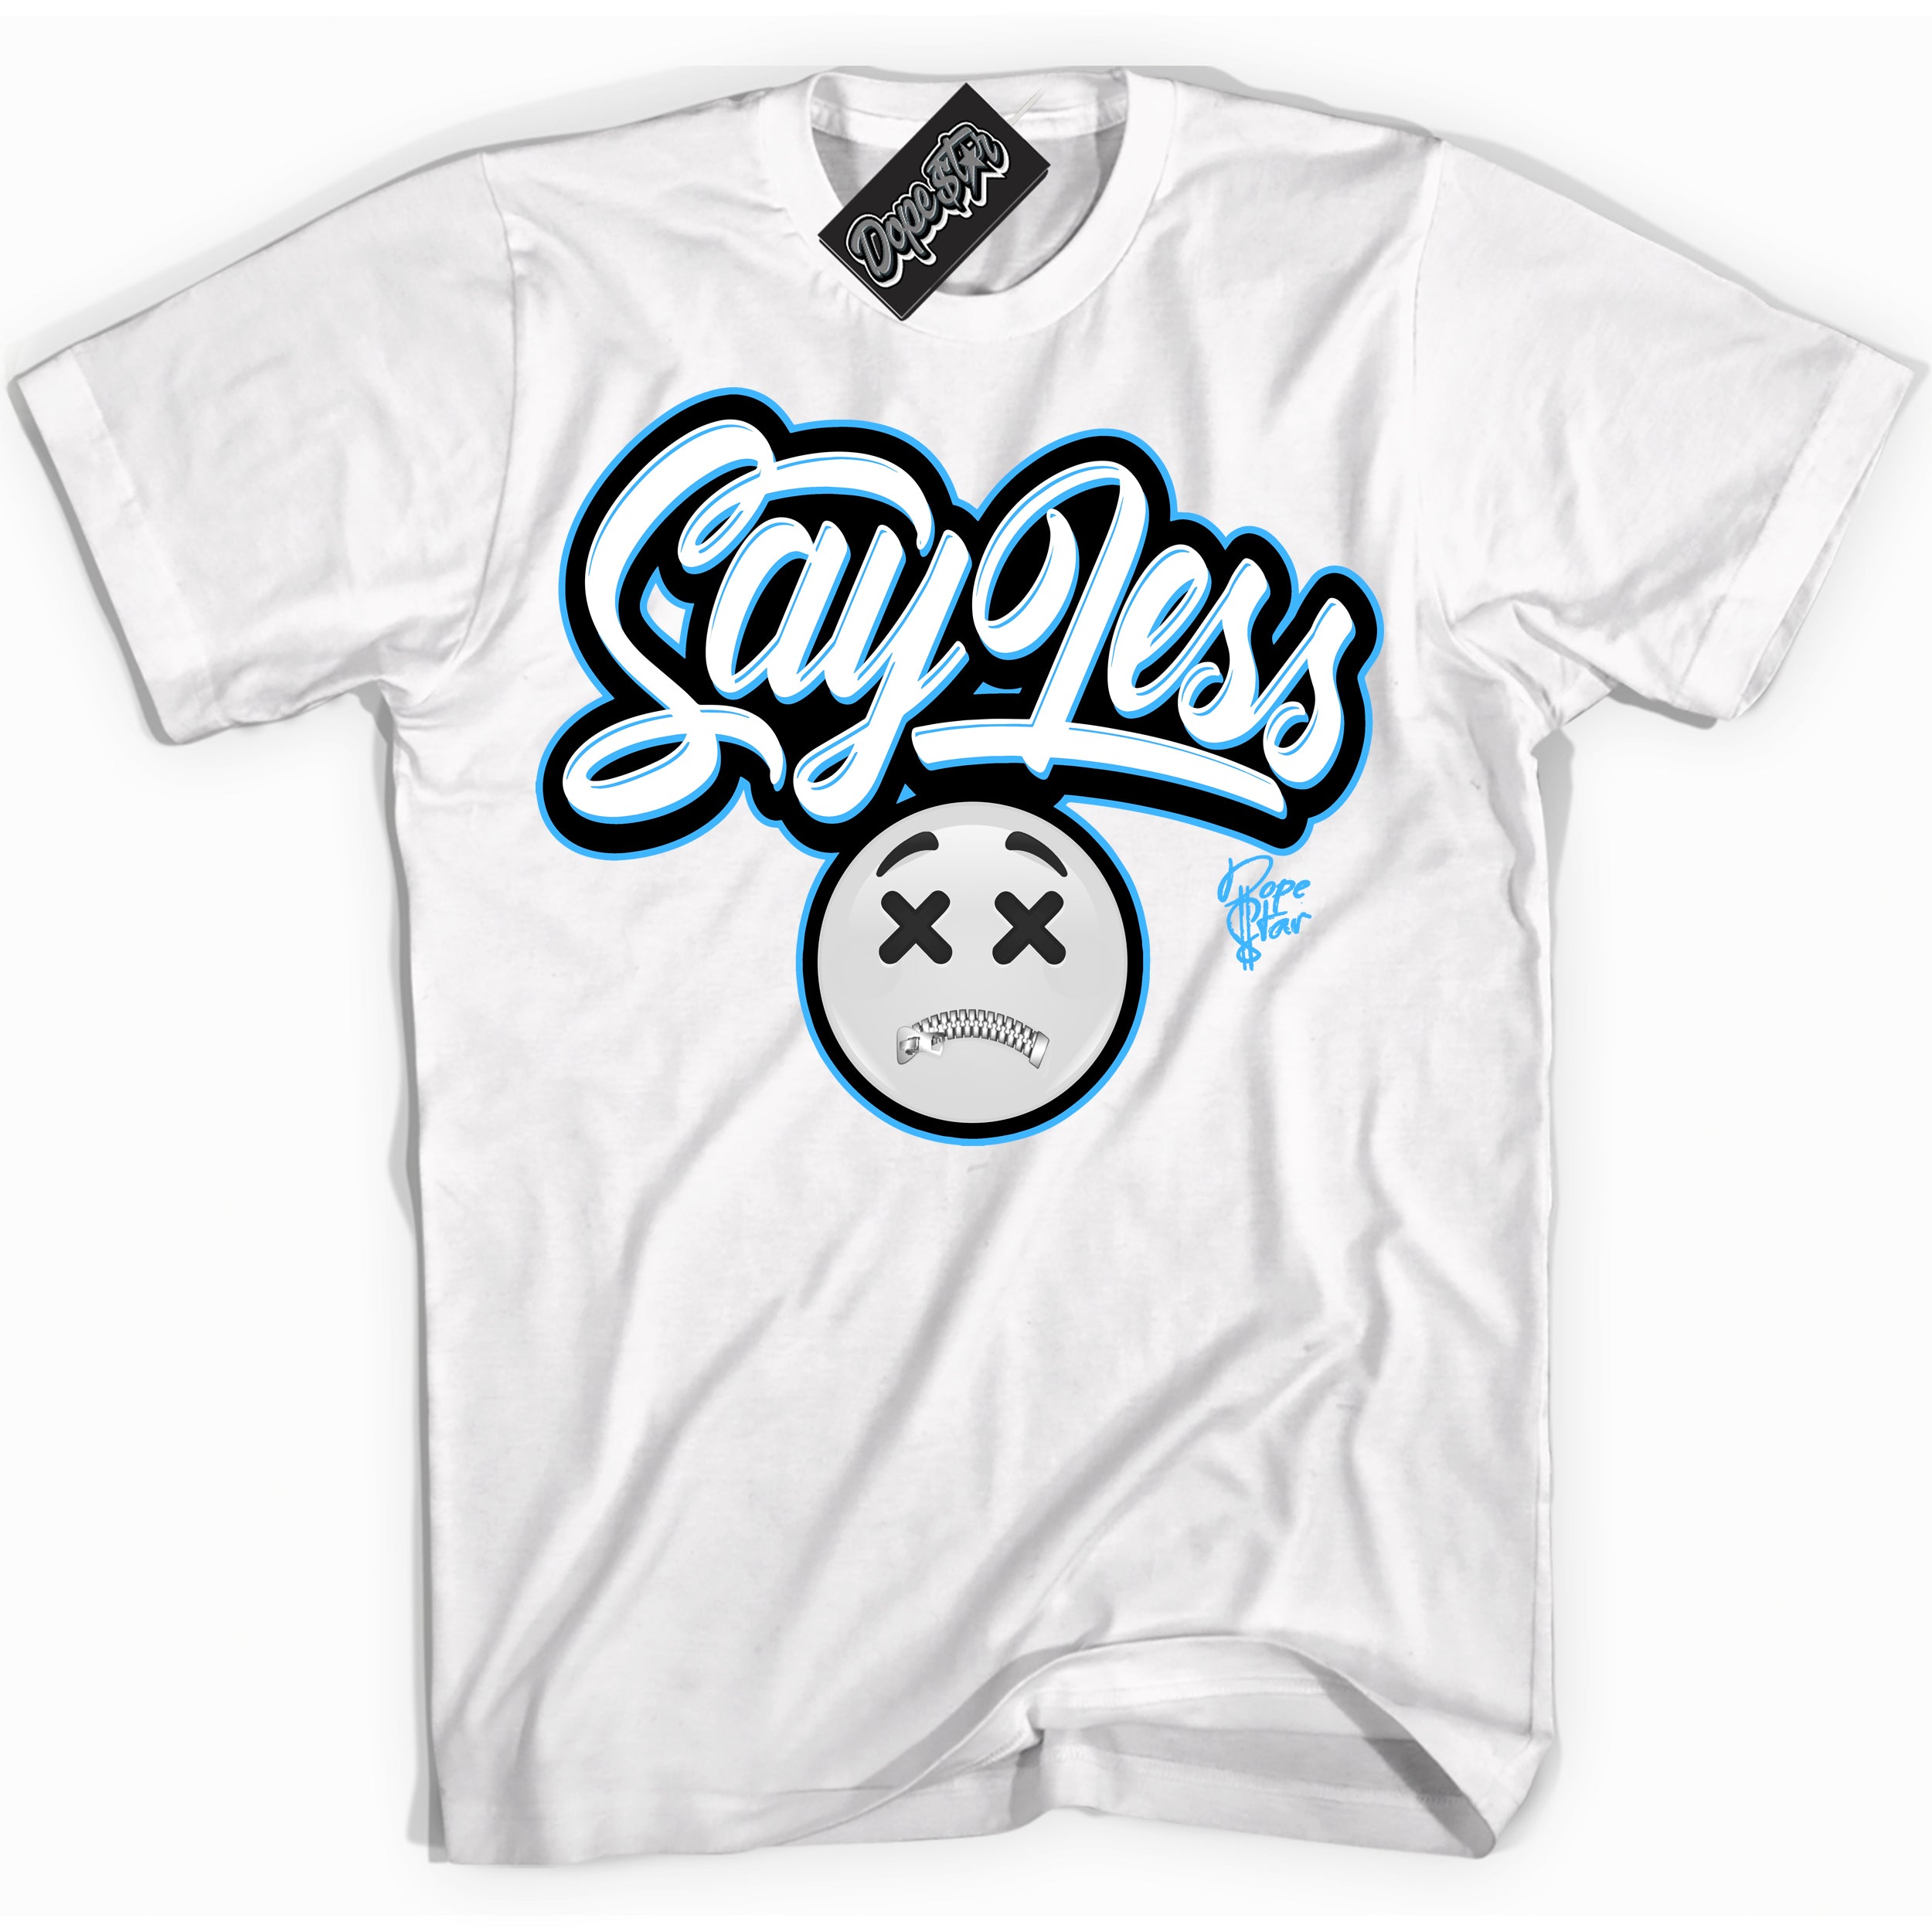 Cool White graphic tee with “ Say Less ” design, that perfectly matches Powder Blue 9s sneakers 